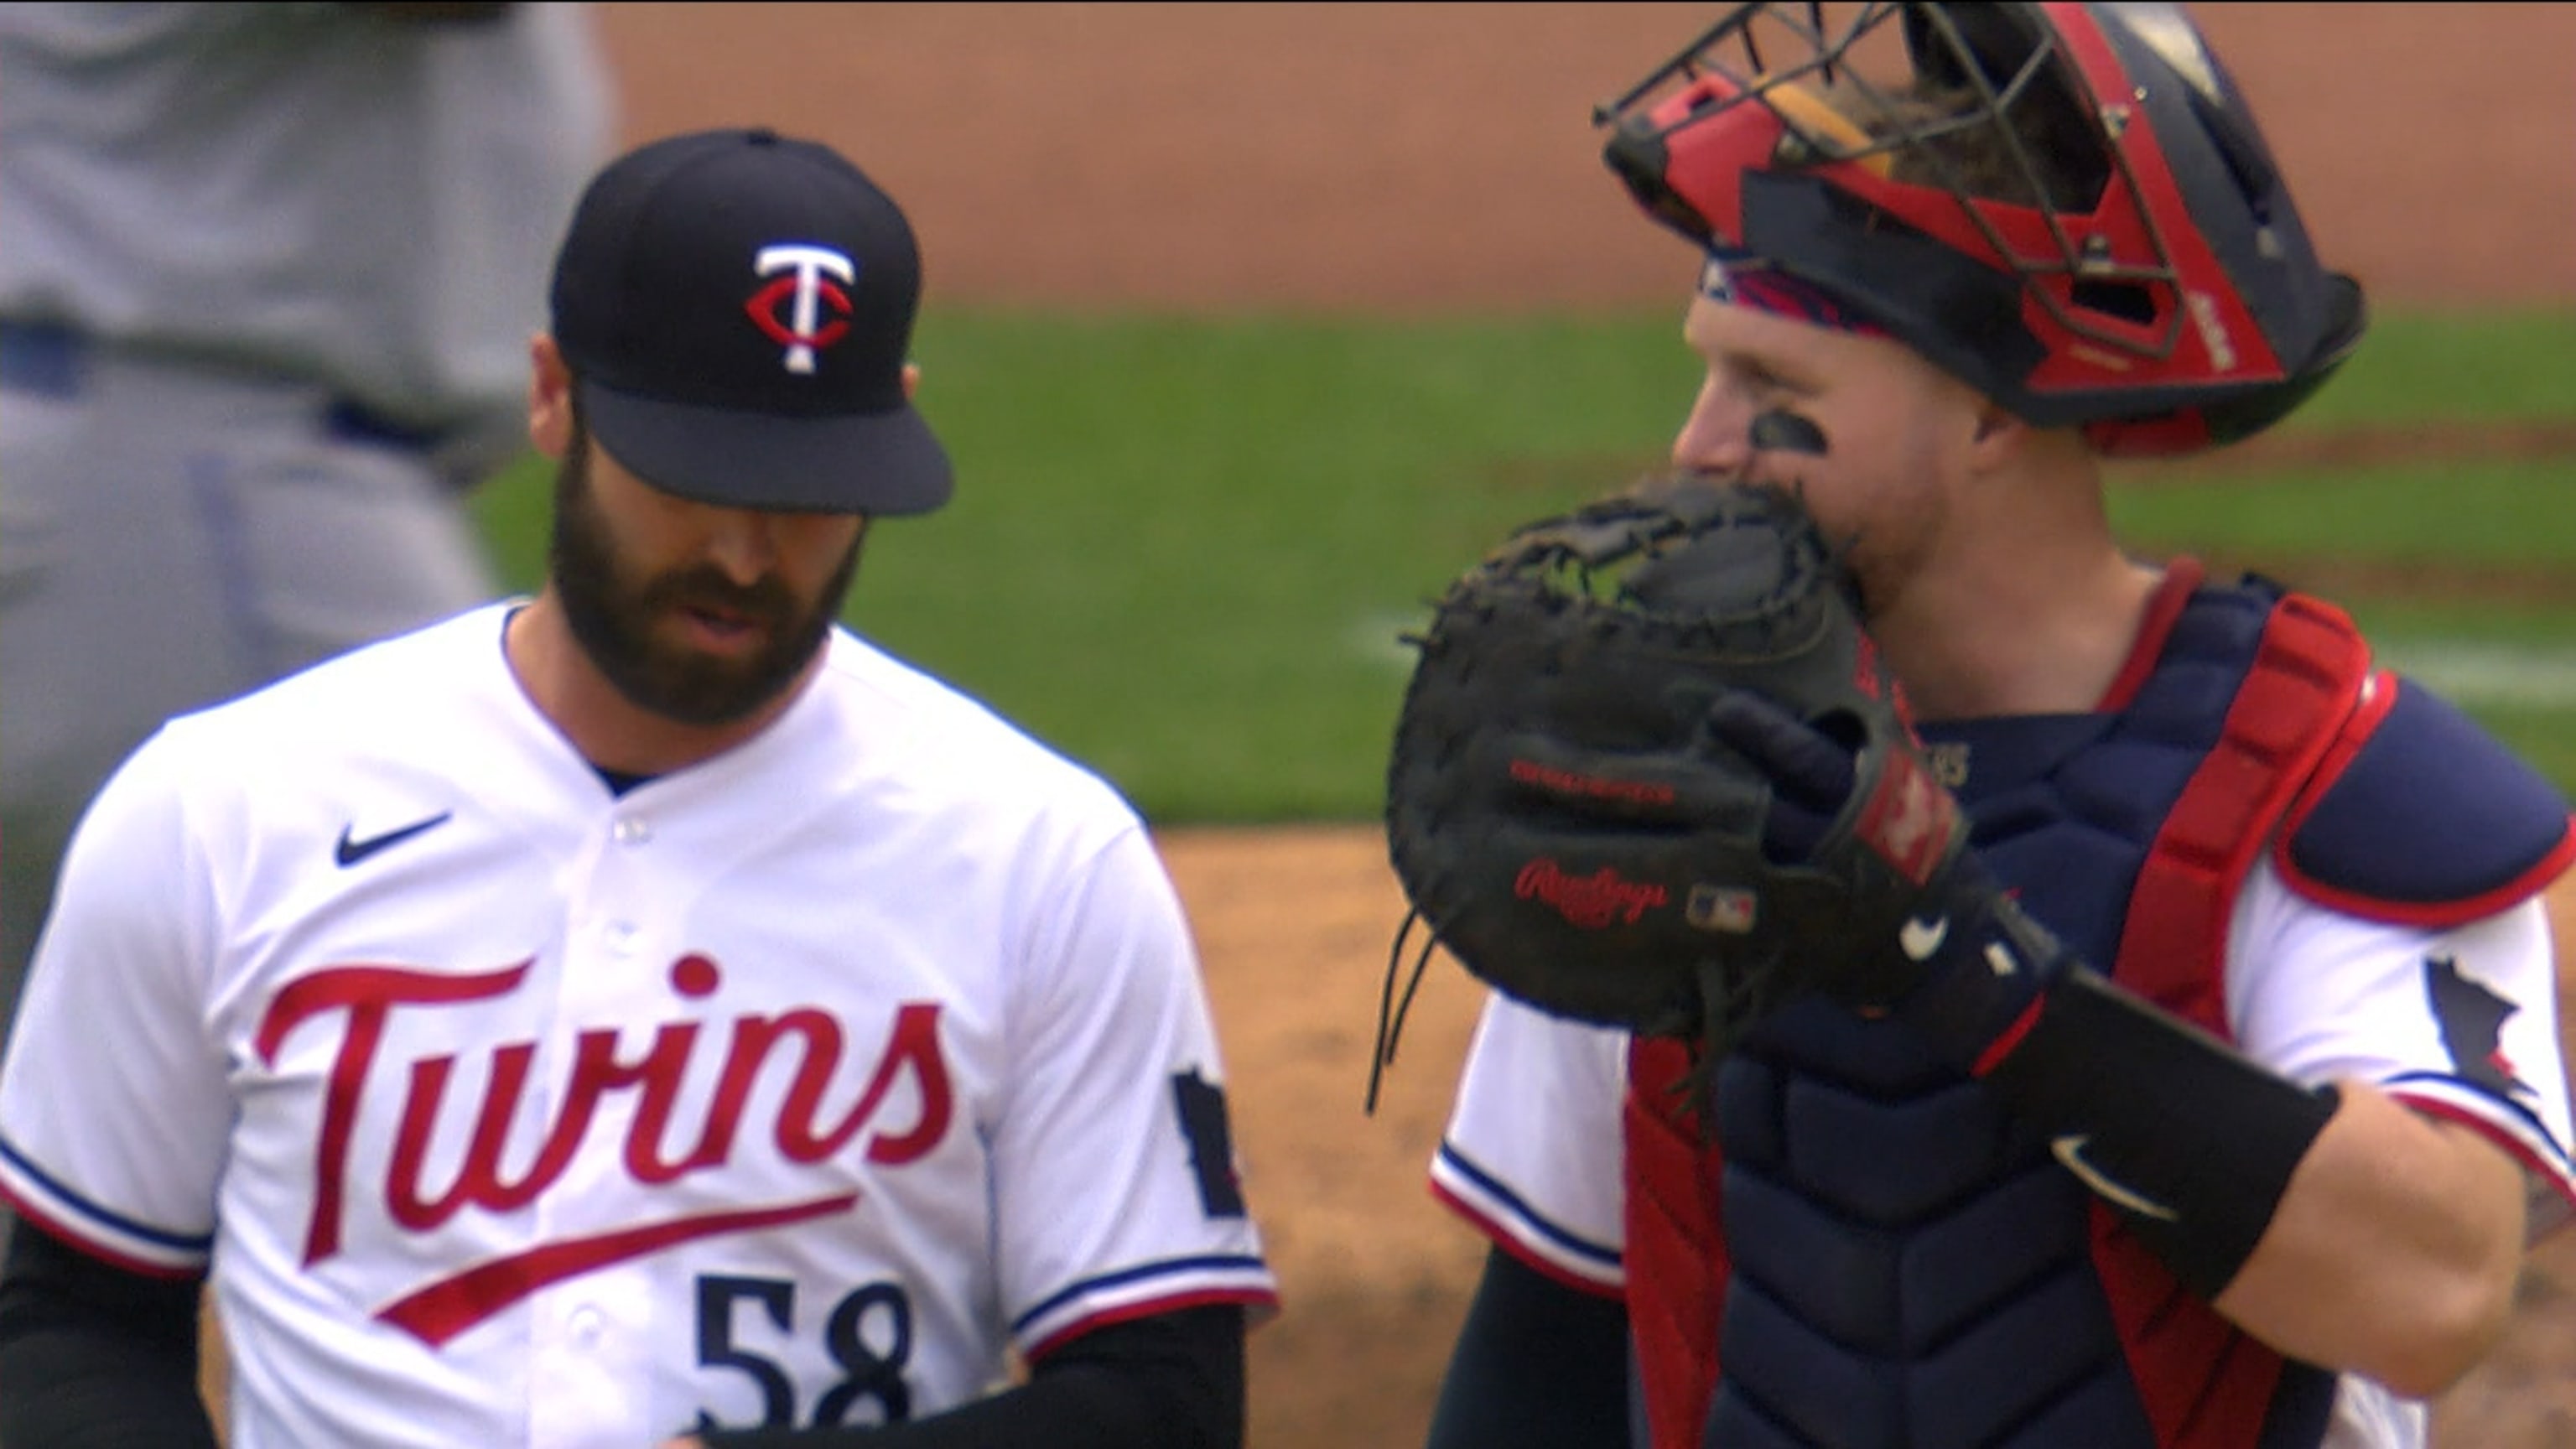 AL Central Preview: The Twins Are Looking For A Bounce Back